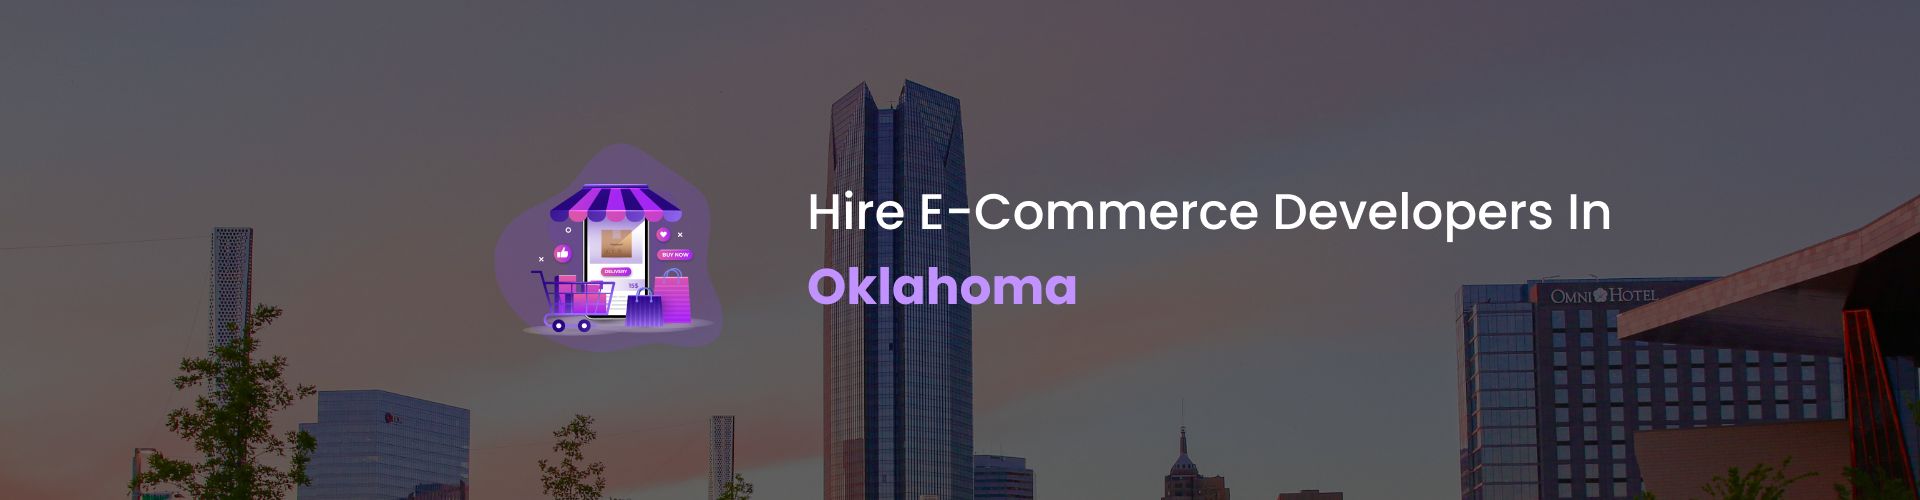 hire ecommerce developers in oklahoma